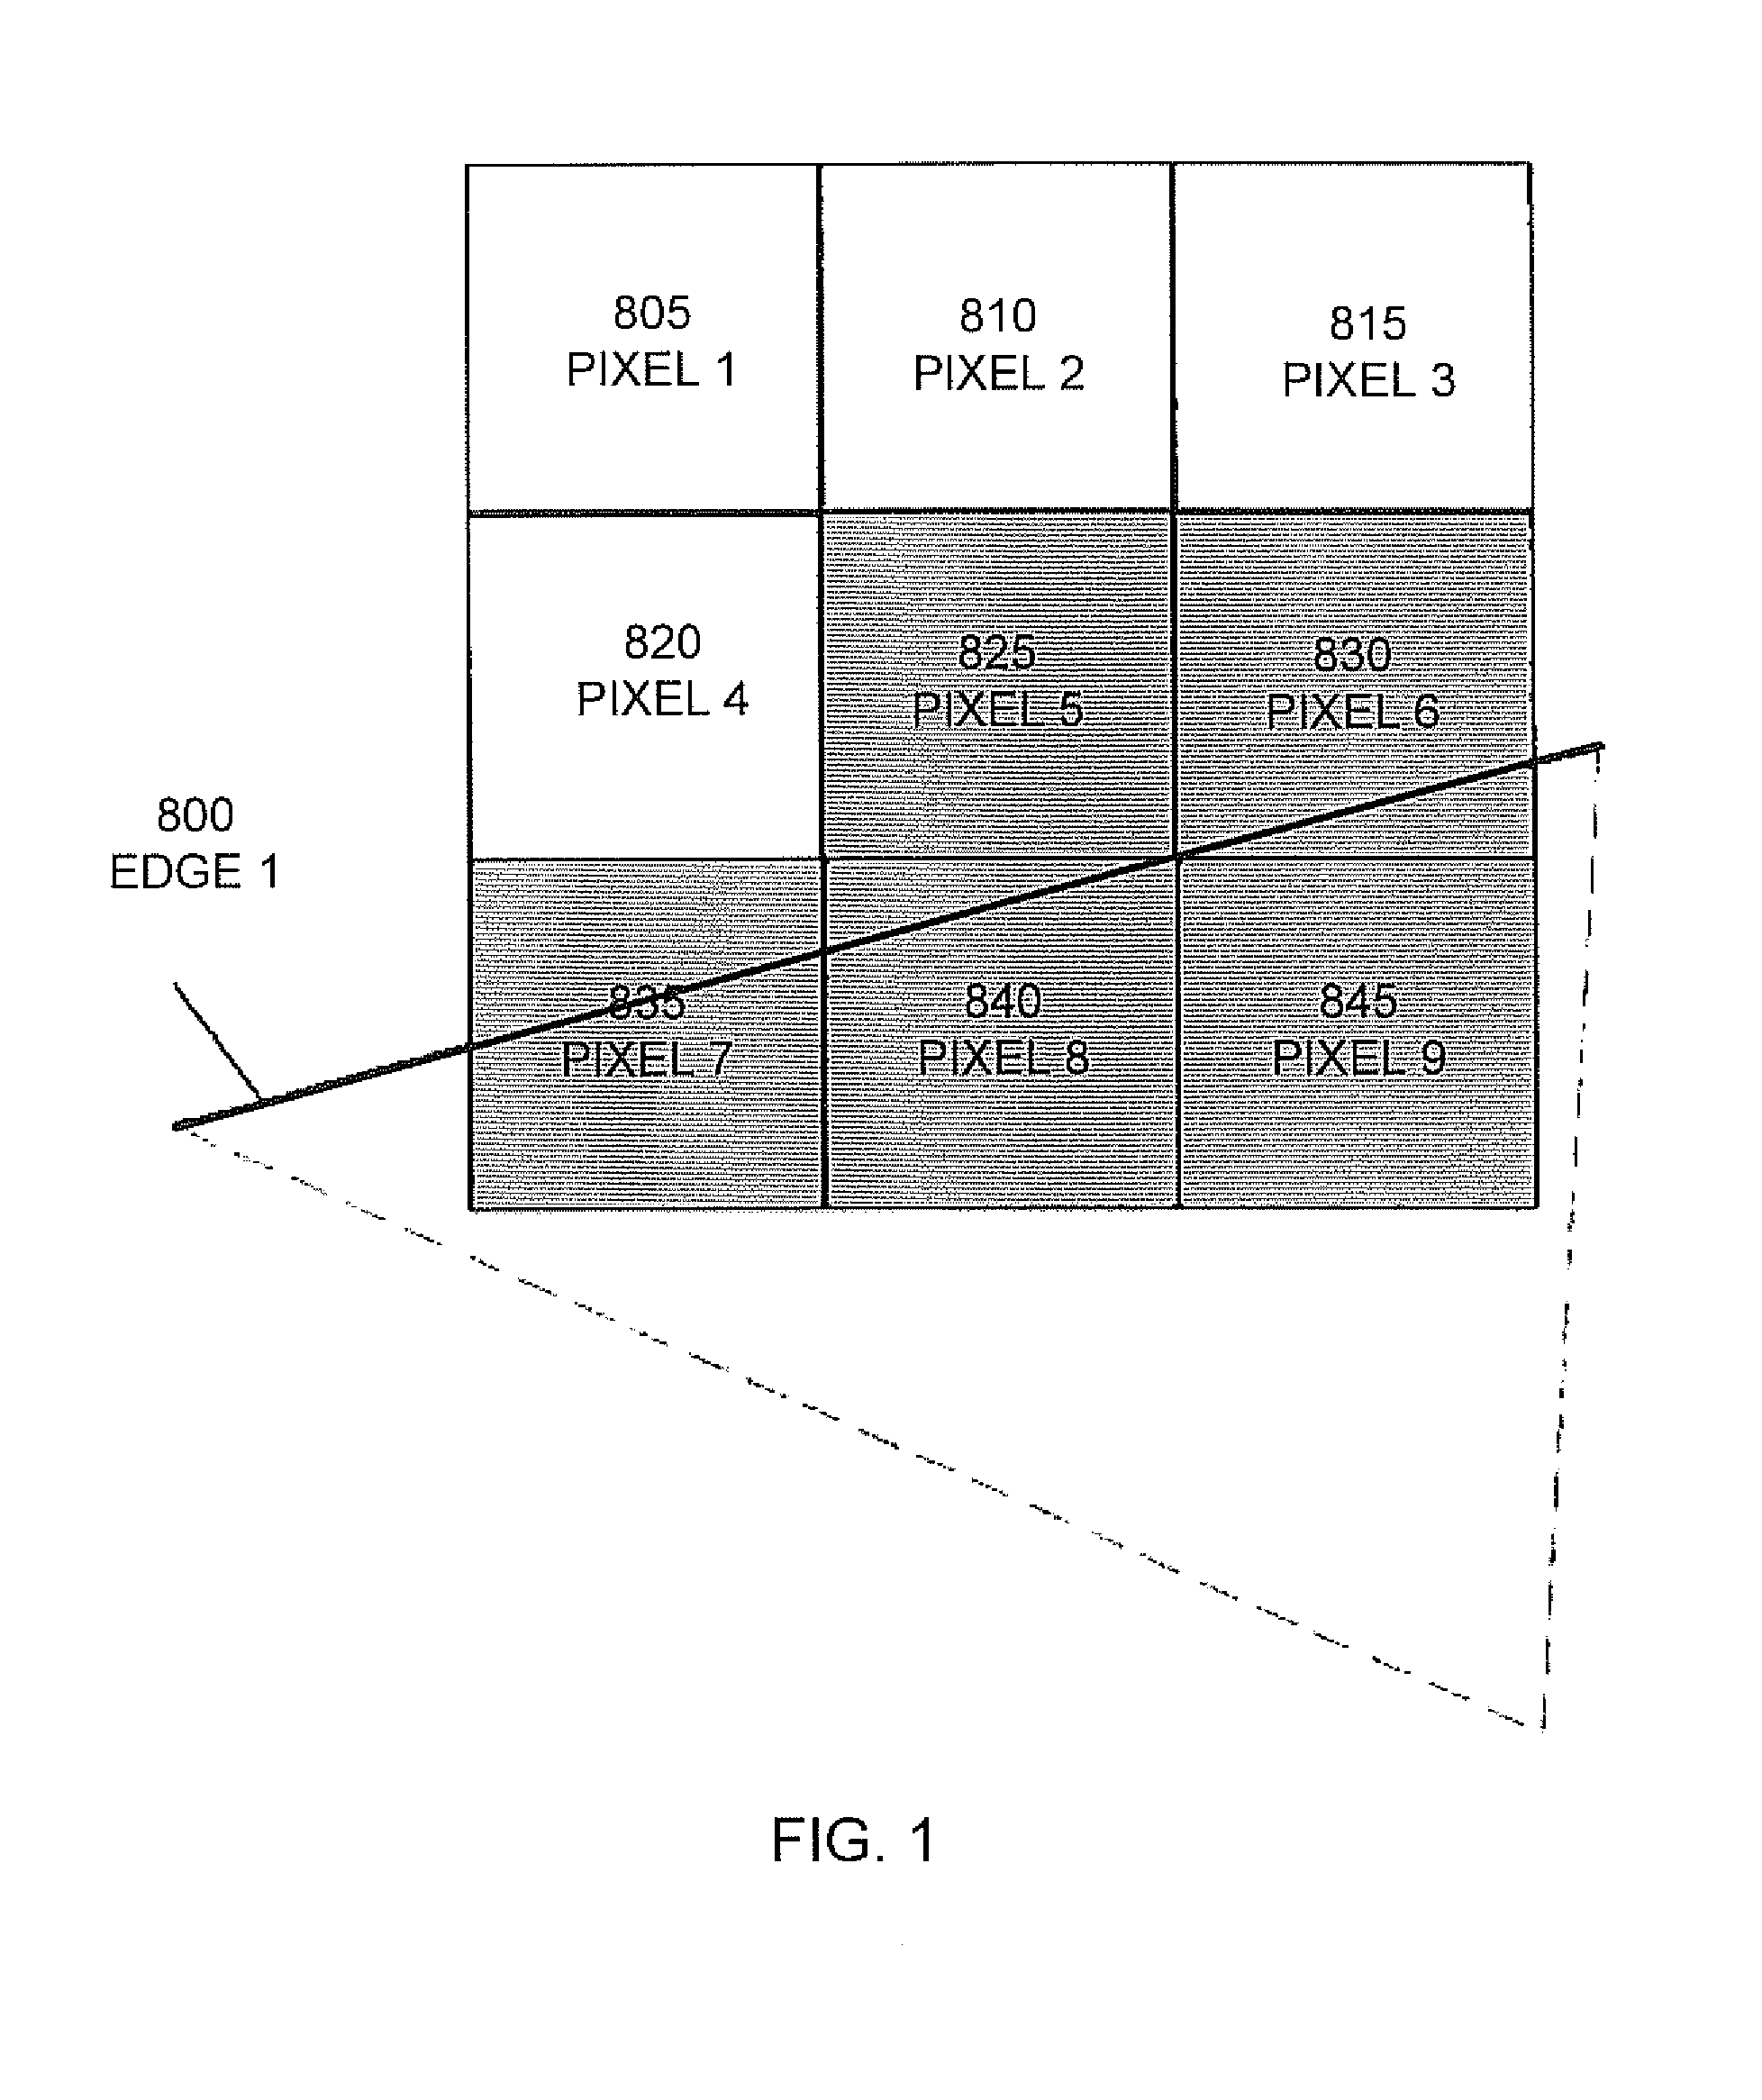 Alternate reduction ratios and threshold mechanisms for framebuffer compression